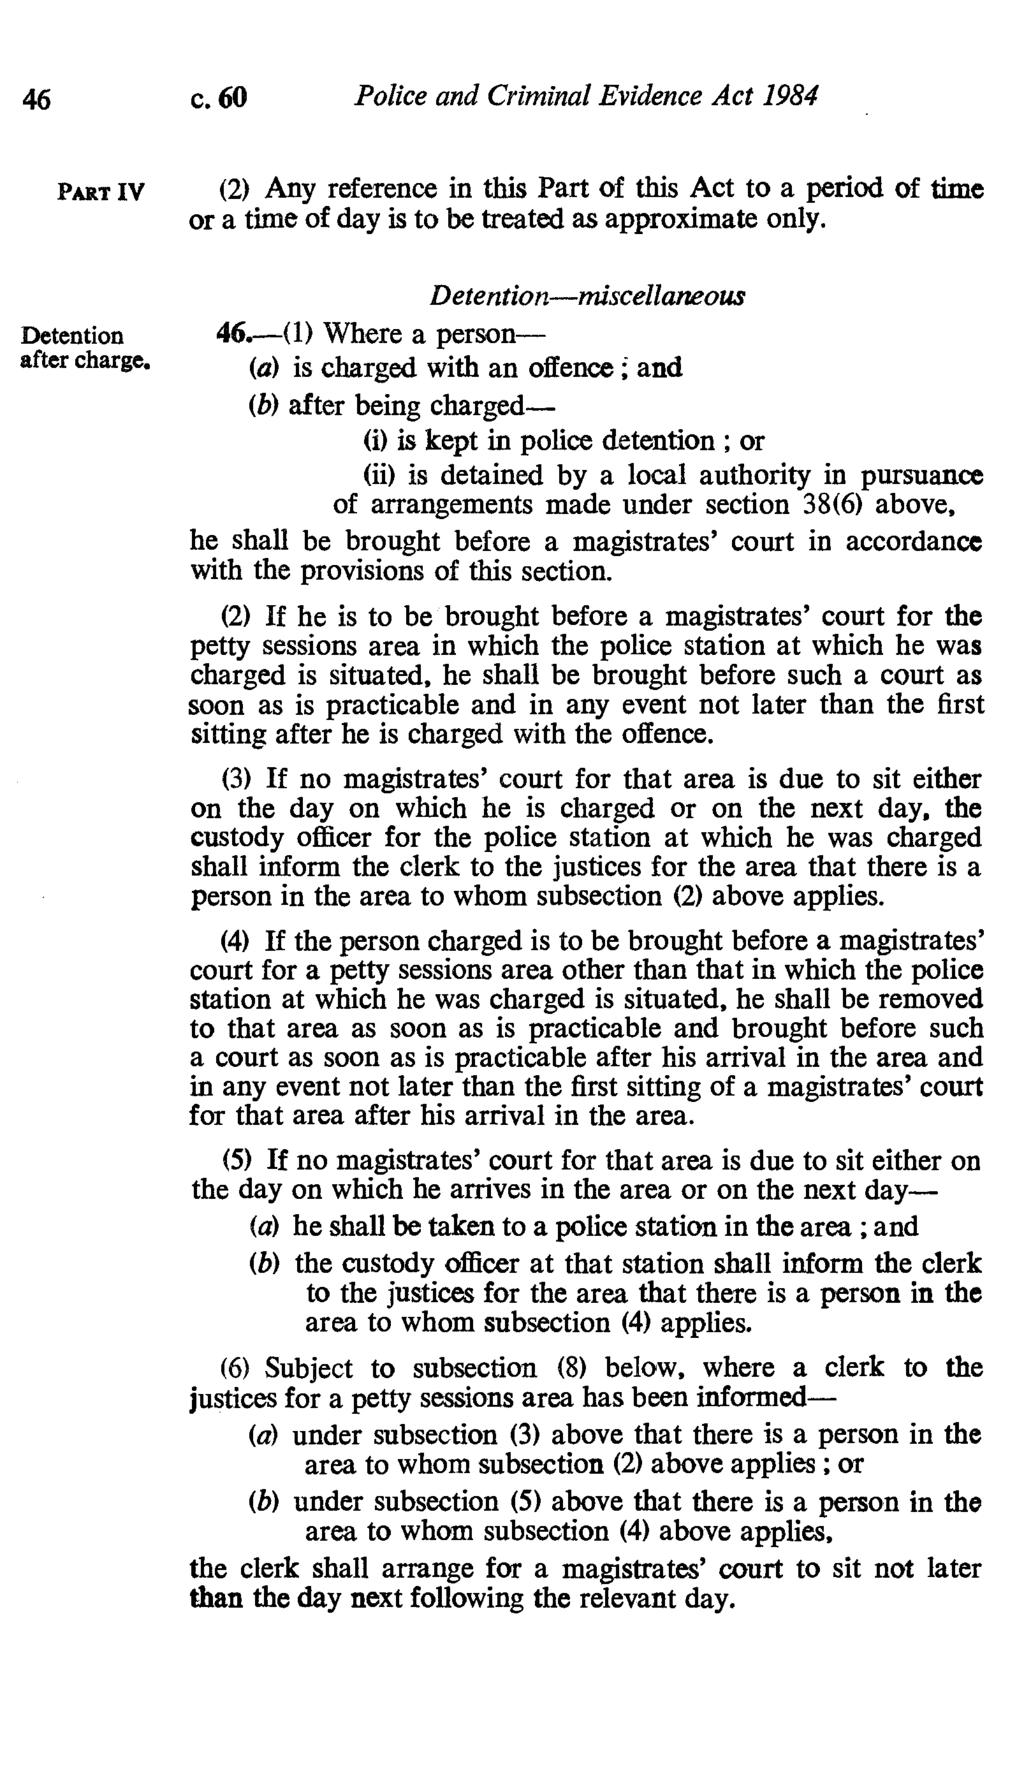 46 c. 60 Police and Criminal Evidence Act 1984 PART iv (2) Any reference in this Part of this Act to a period of time or a time of day is to be treated as approximate only. Detention after charge. 46.